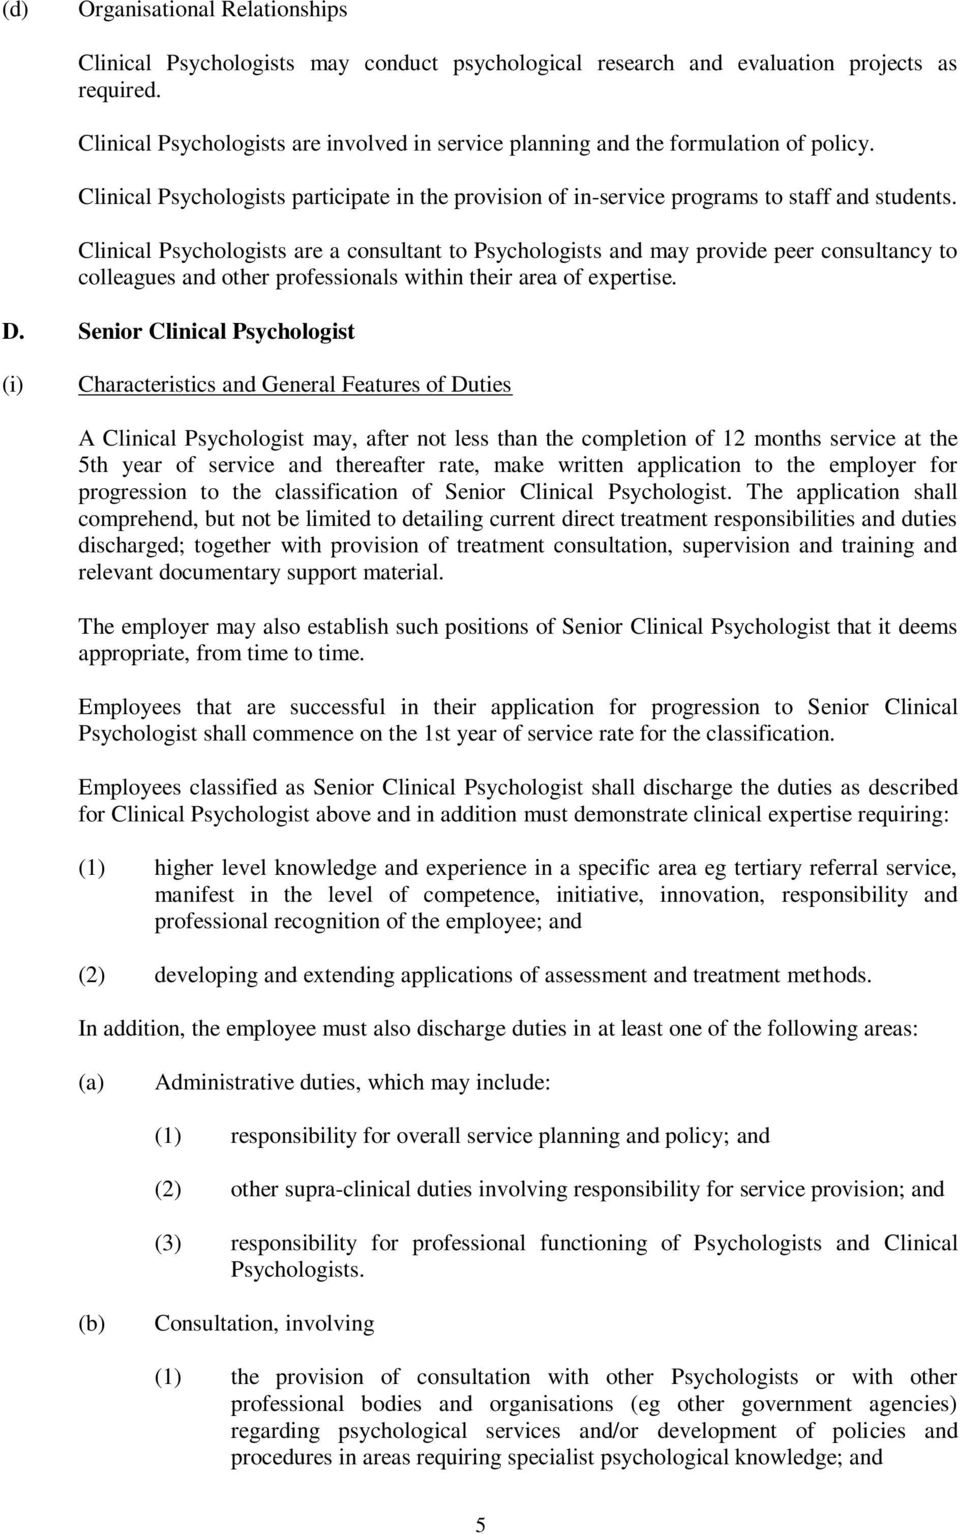 Clinical Psychologists are a consultant to Psychologists and may provide peer consultancy to colleagues and other professionals within their area of expertise. D.